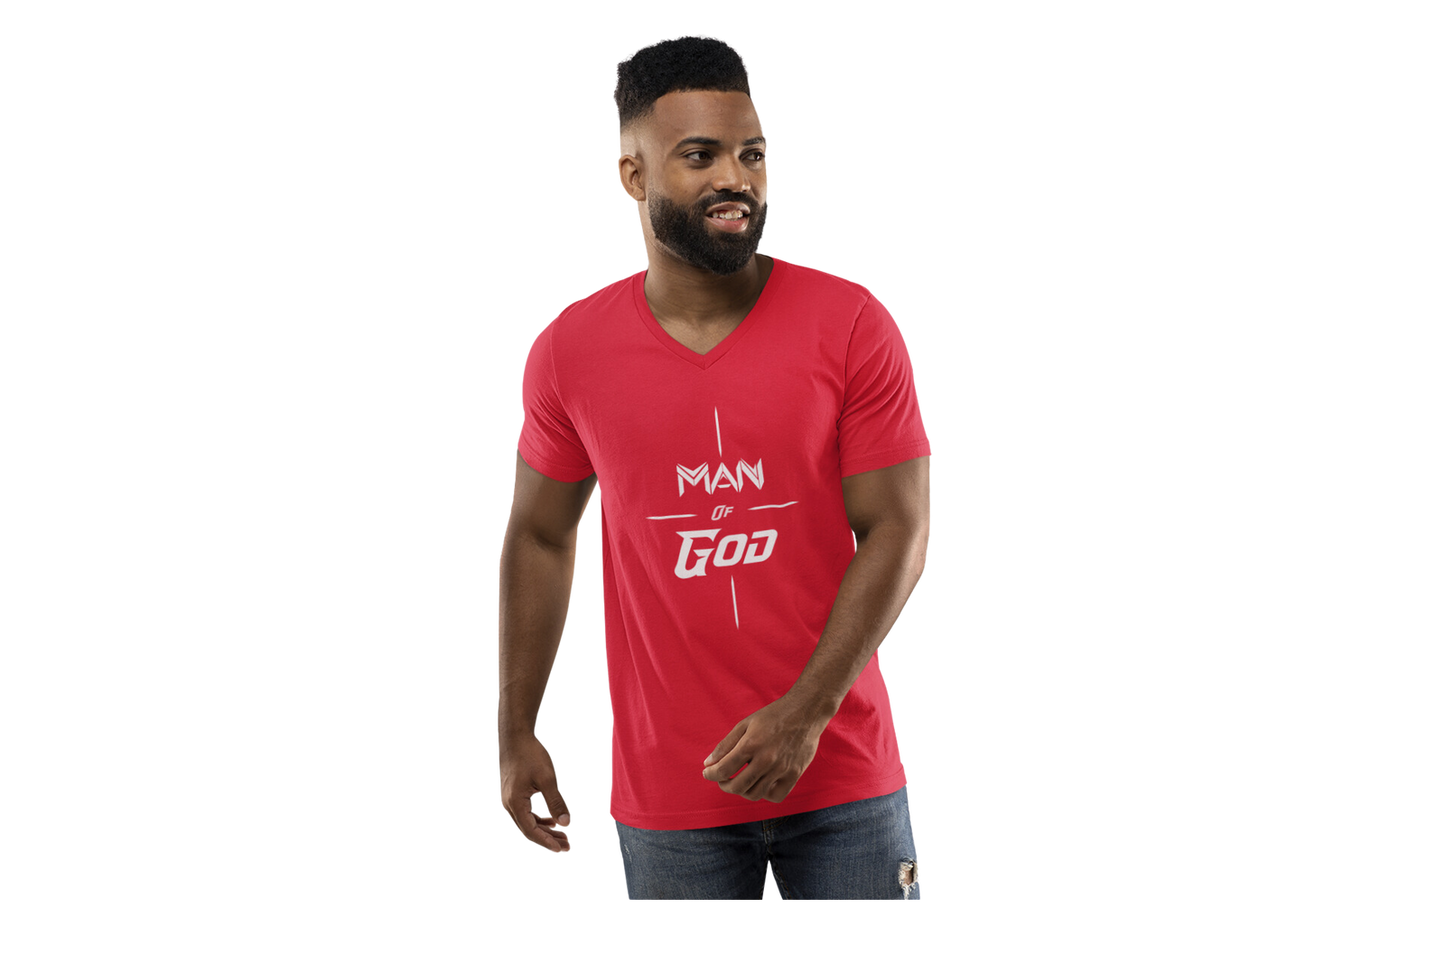 Man of God: V-Neck (Available in more colors)